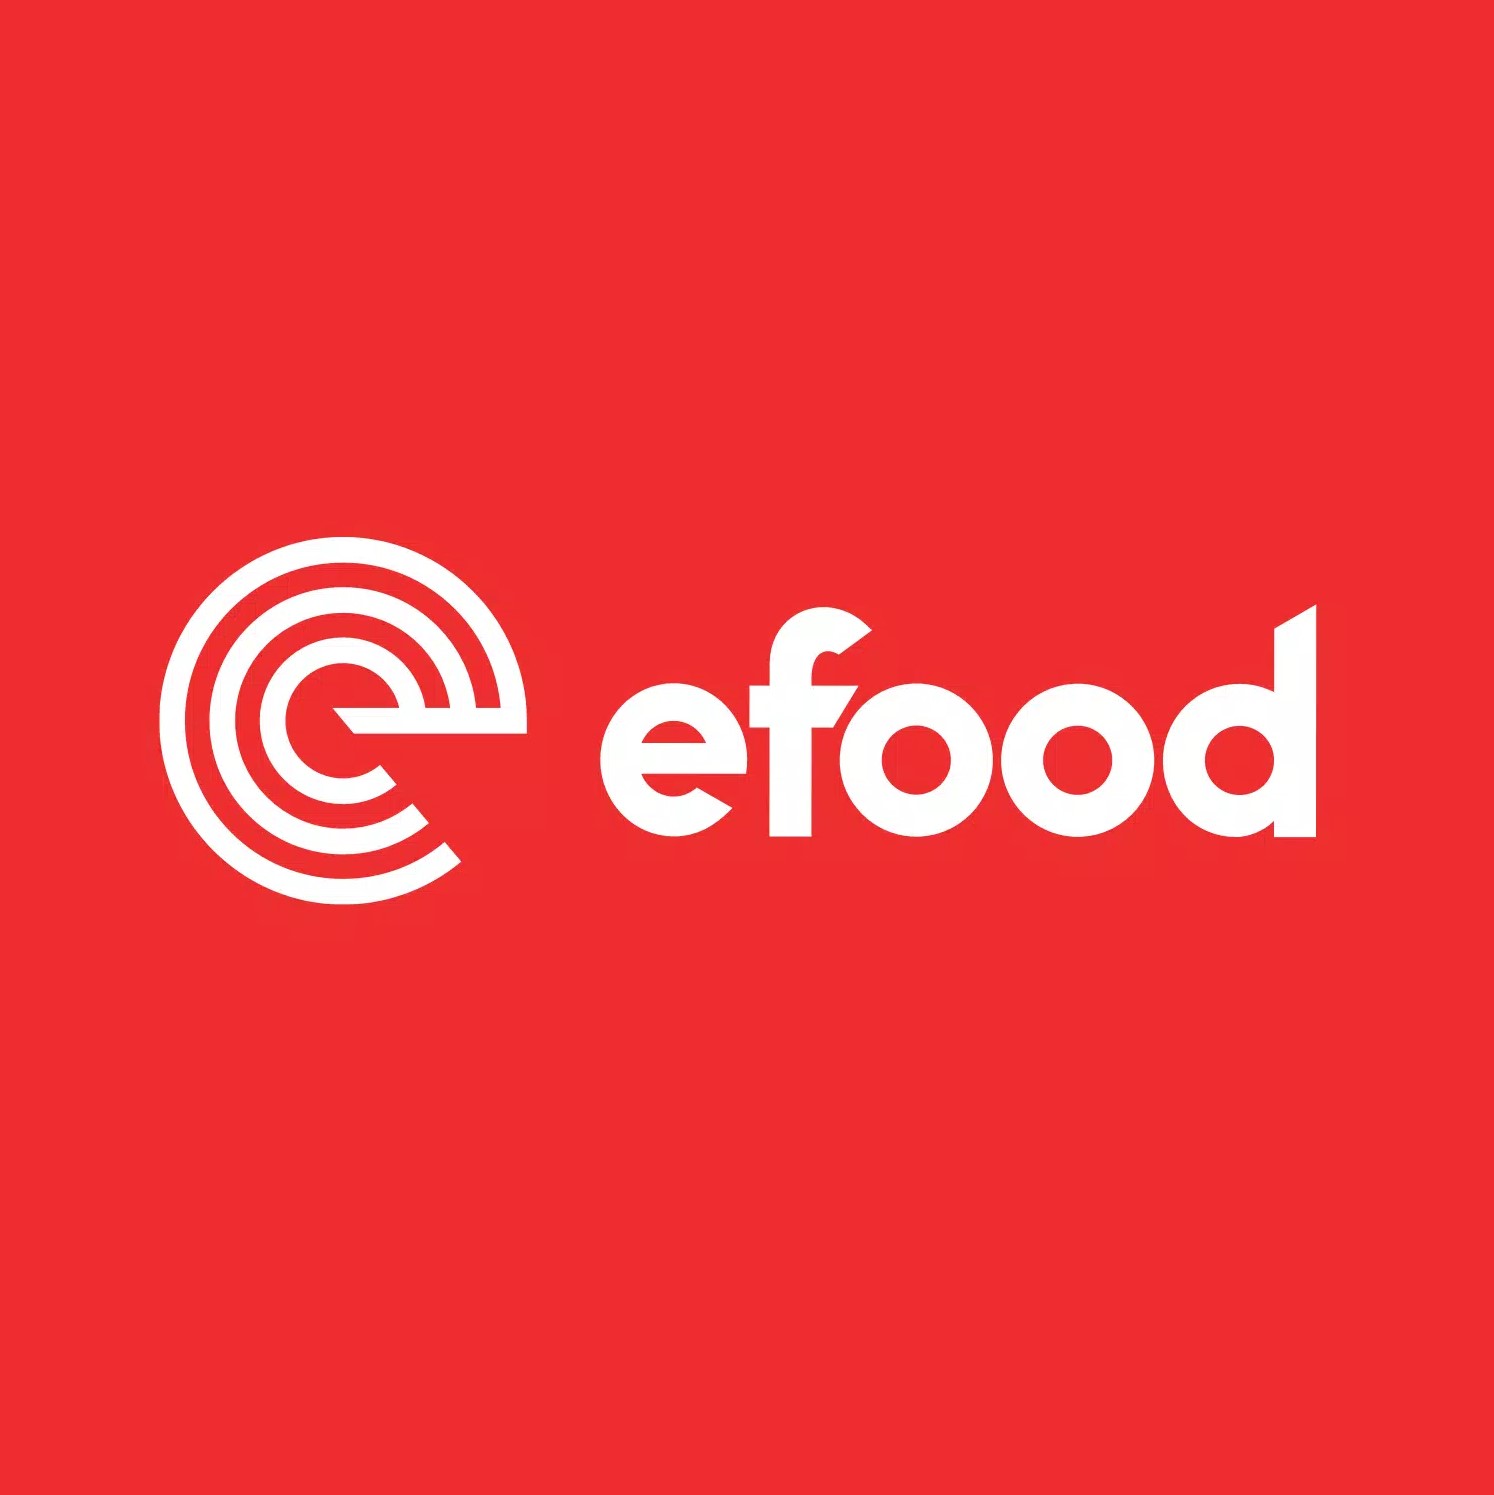 efood-red